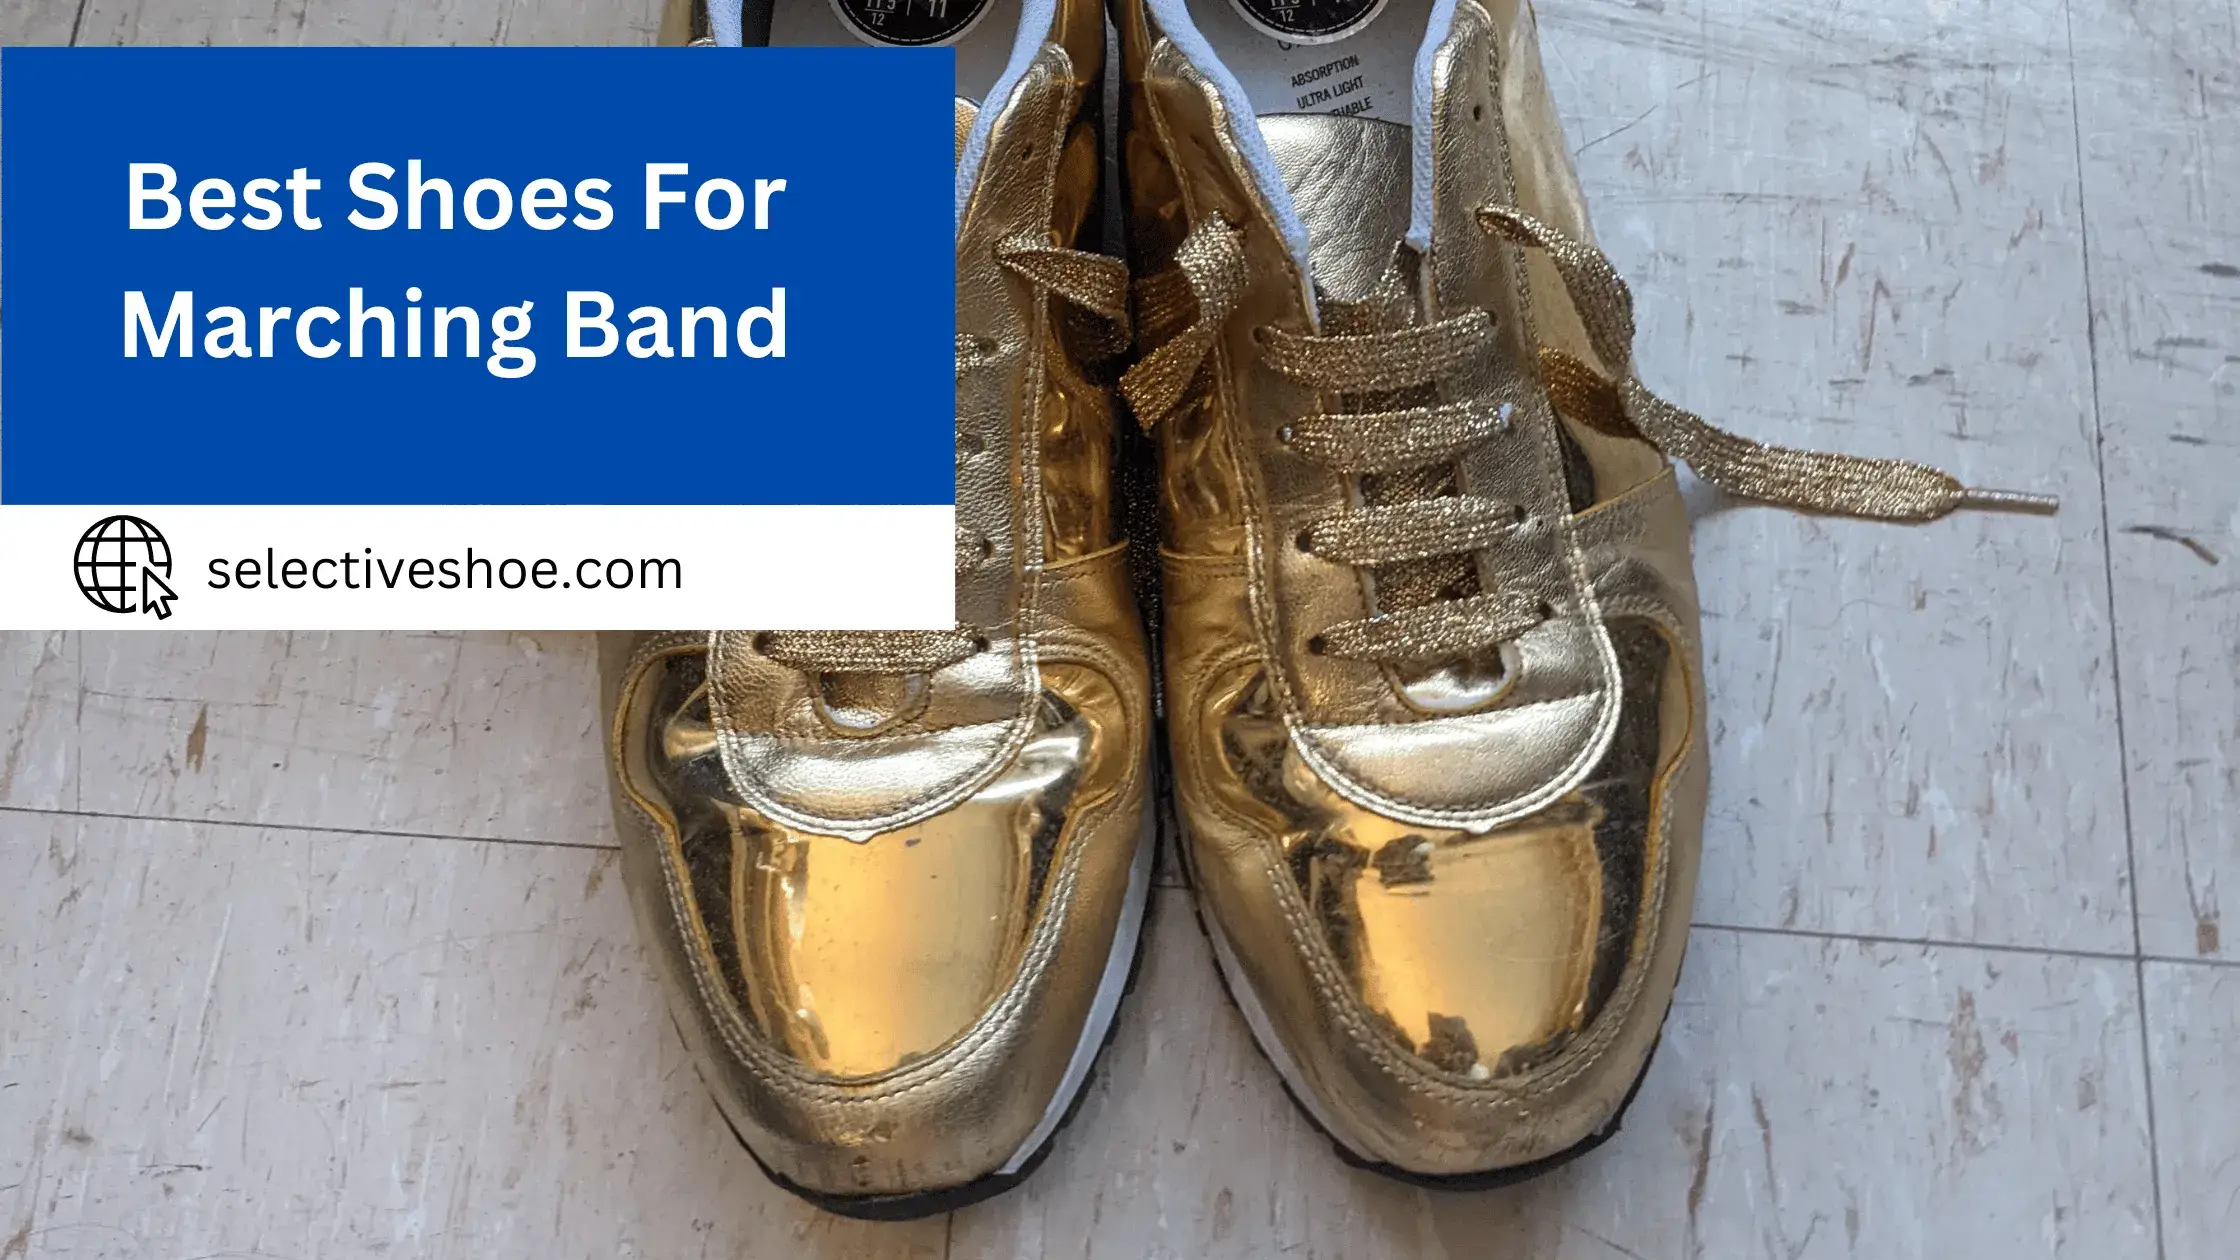 Best Shoes For Marching Band - (An In-Depth Guide)